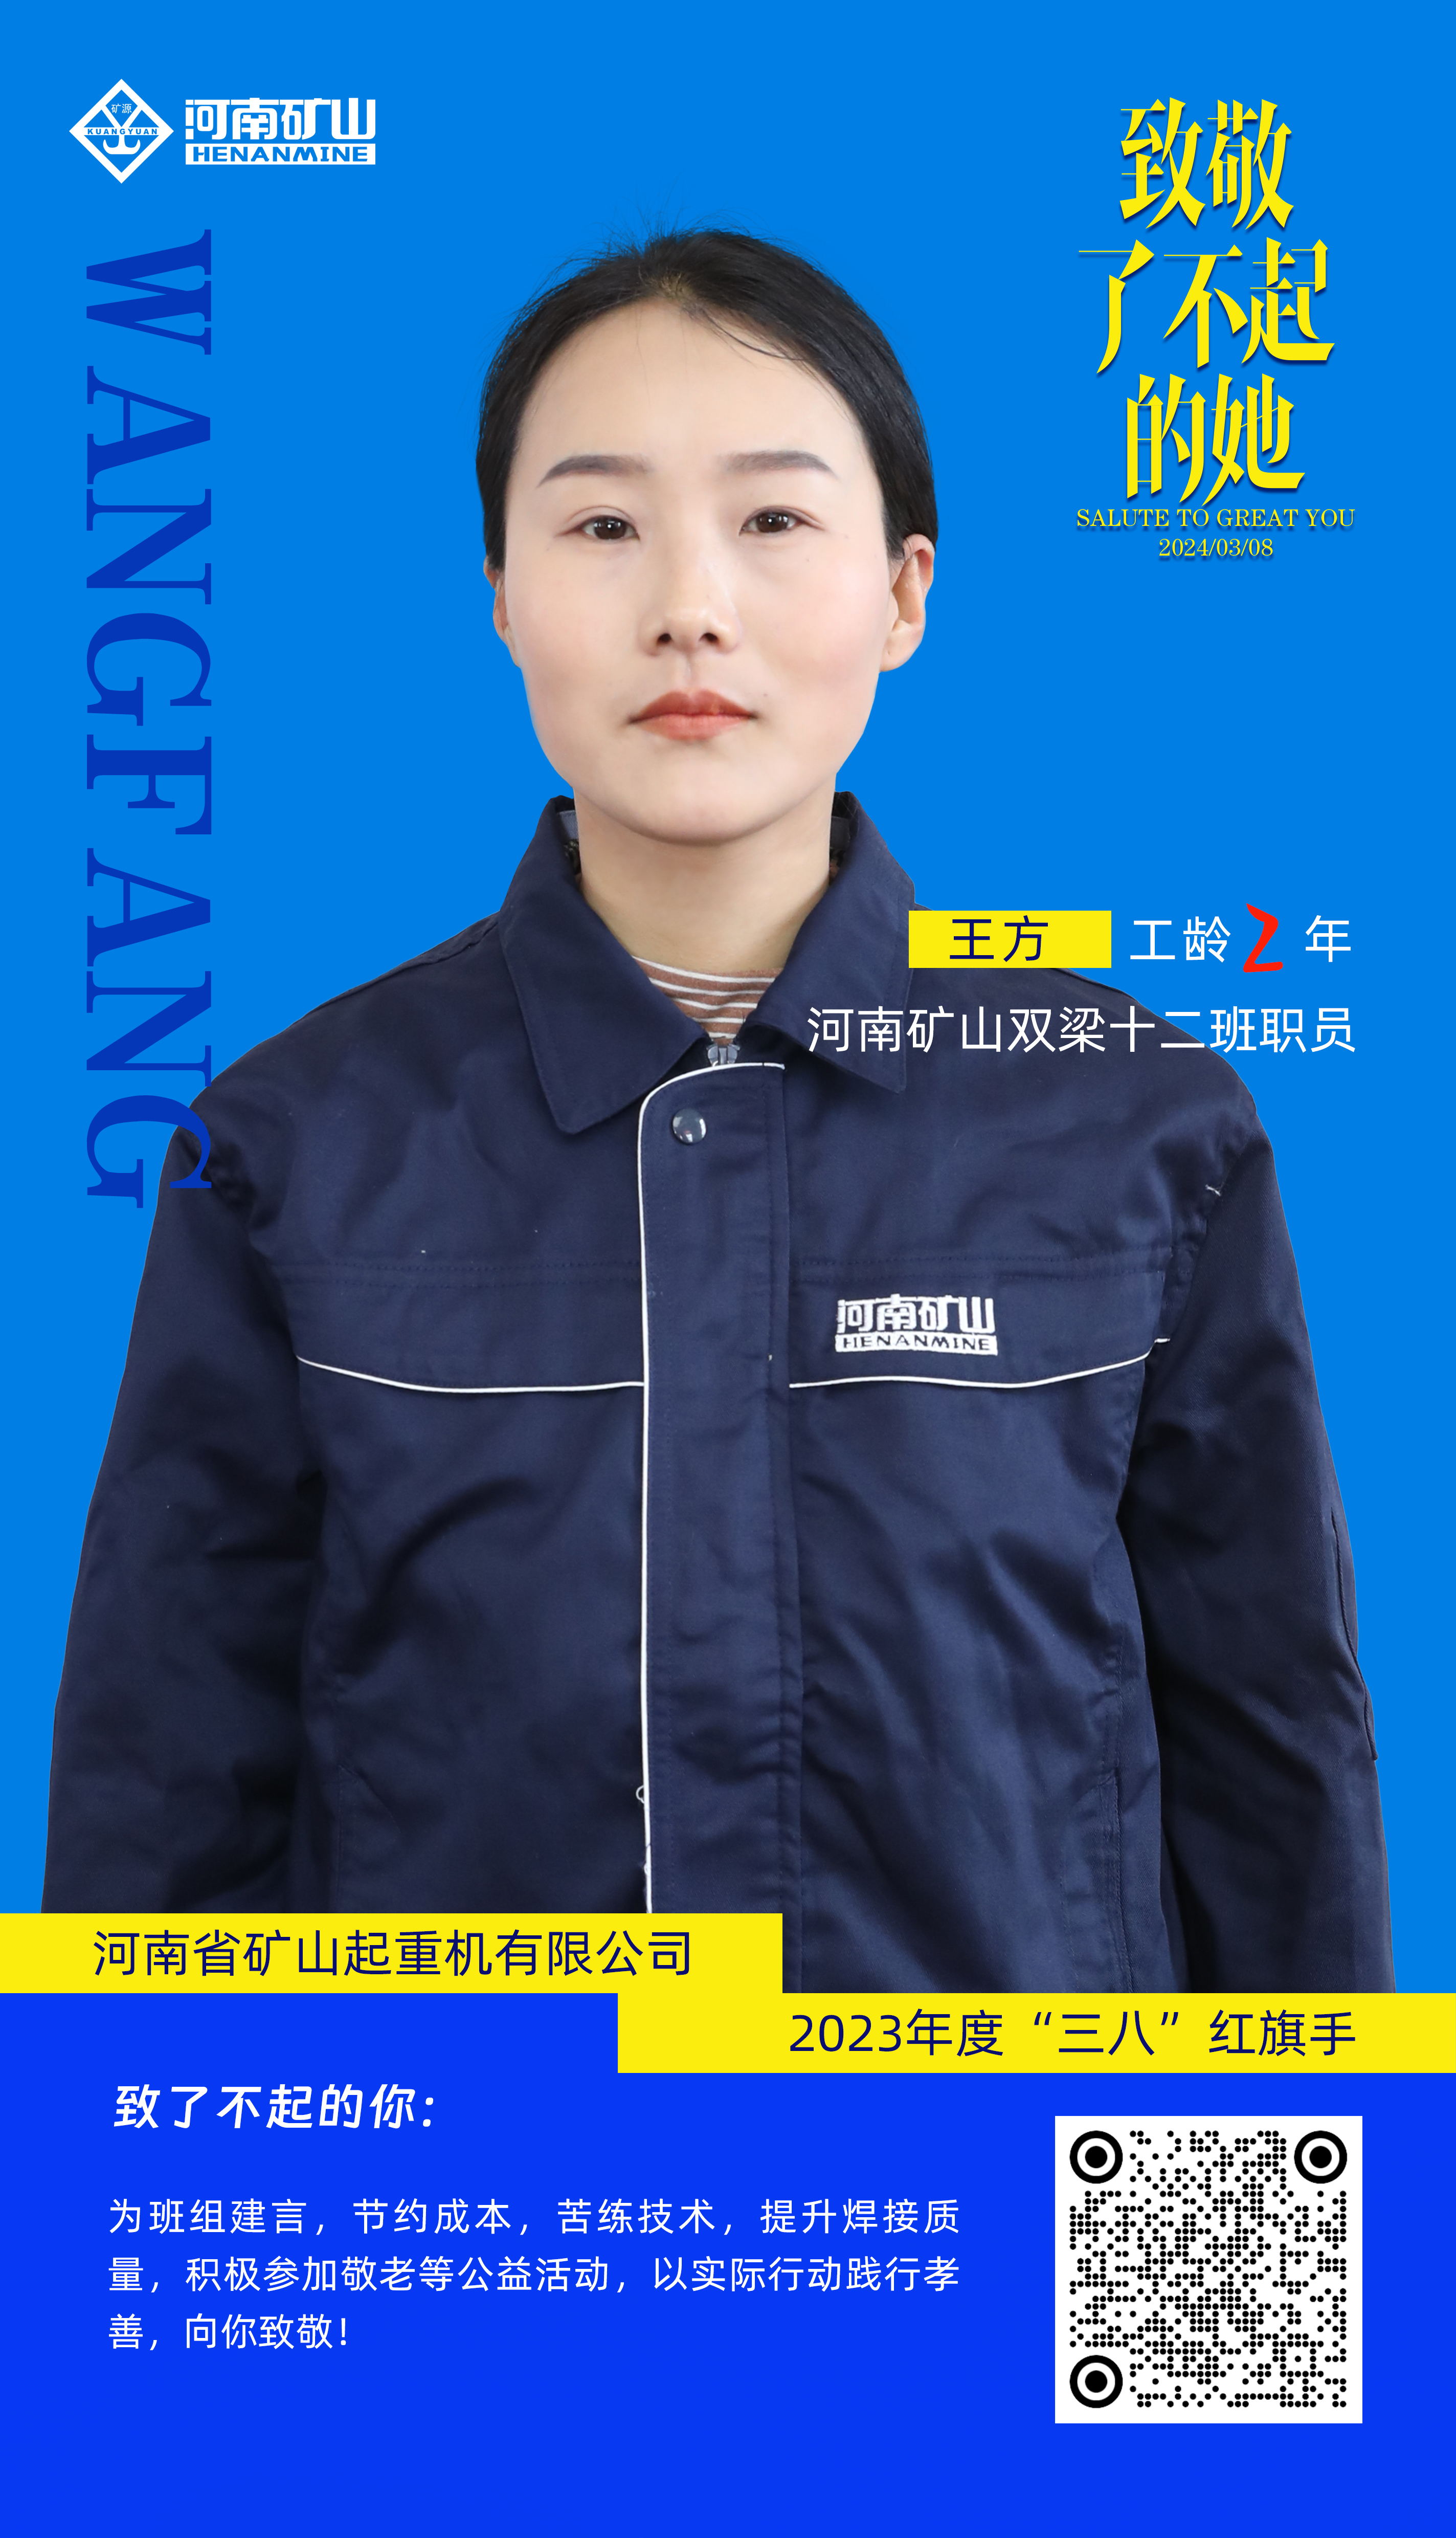 Henan Mining 38 Special Edition: Salute to the Amazing Women